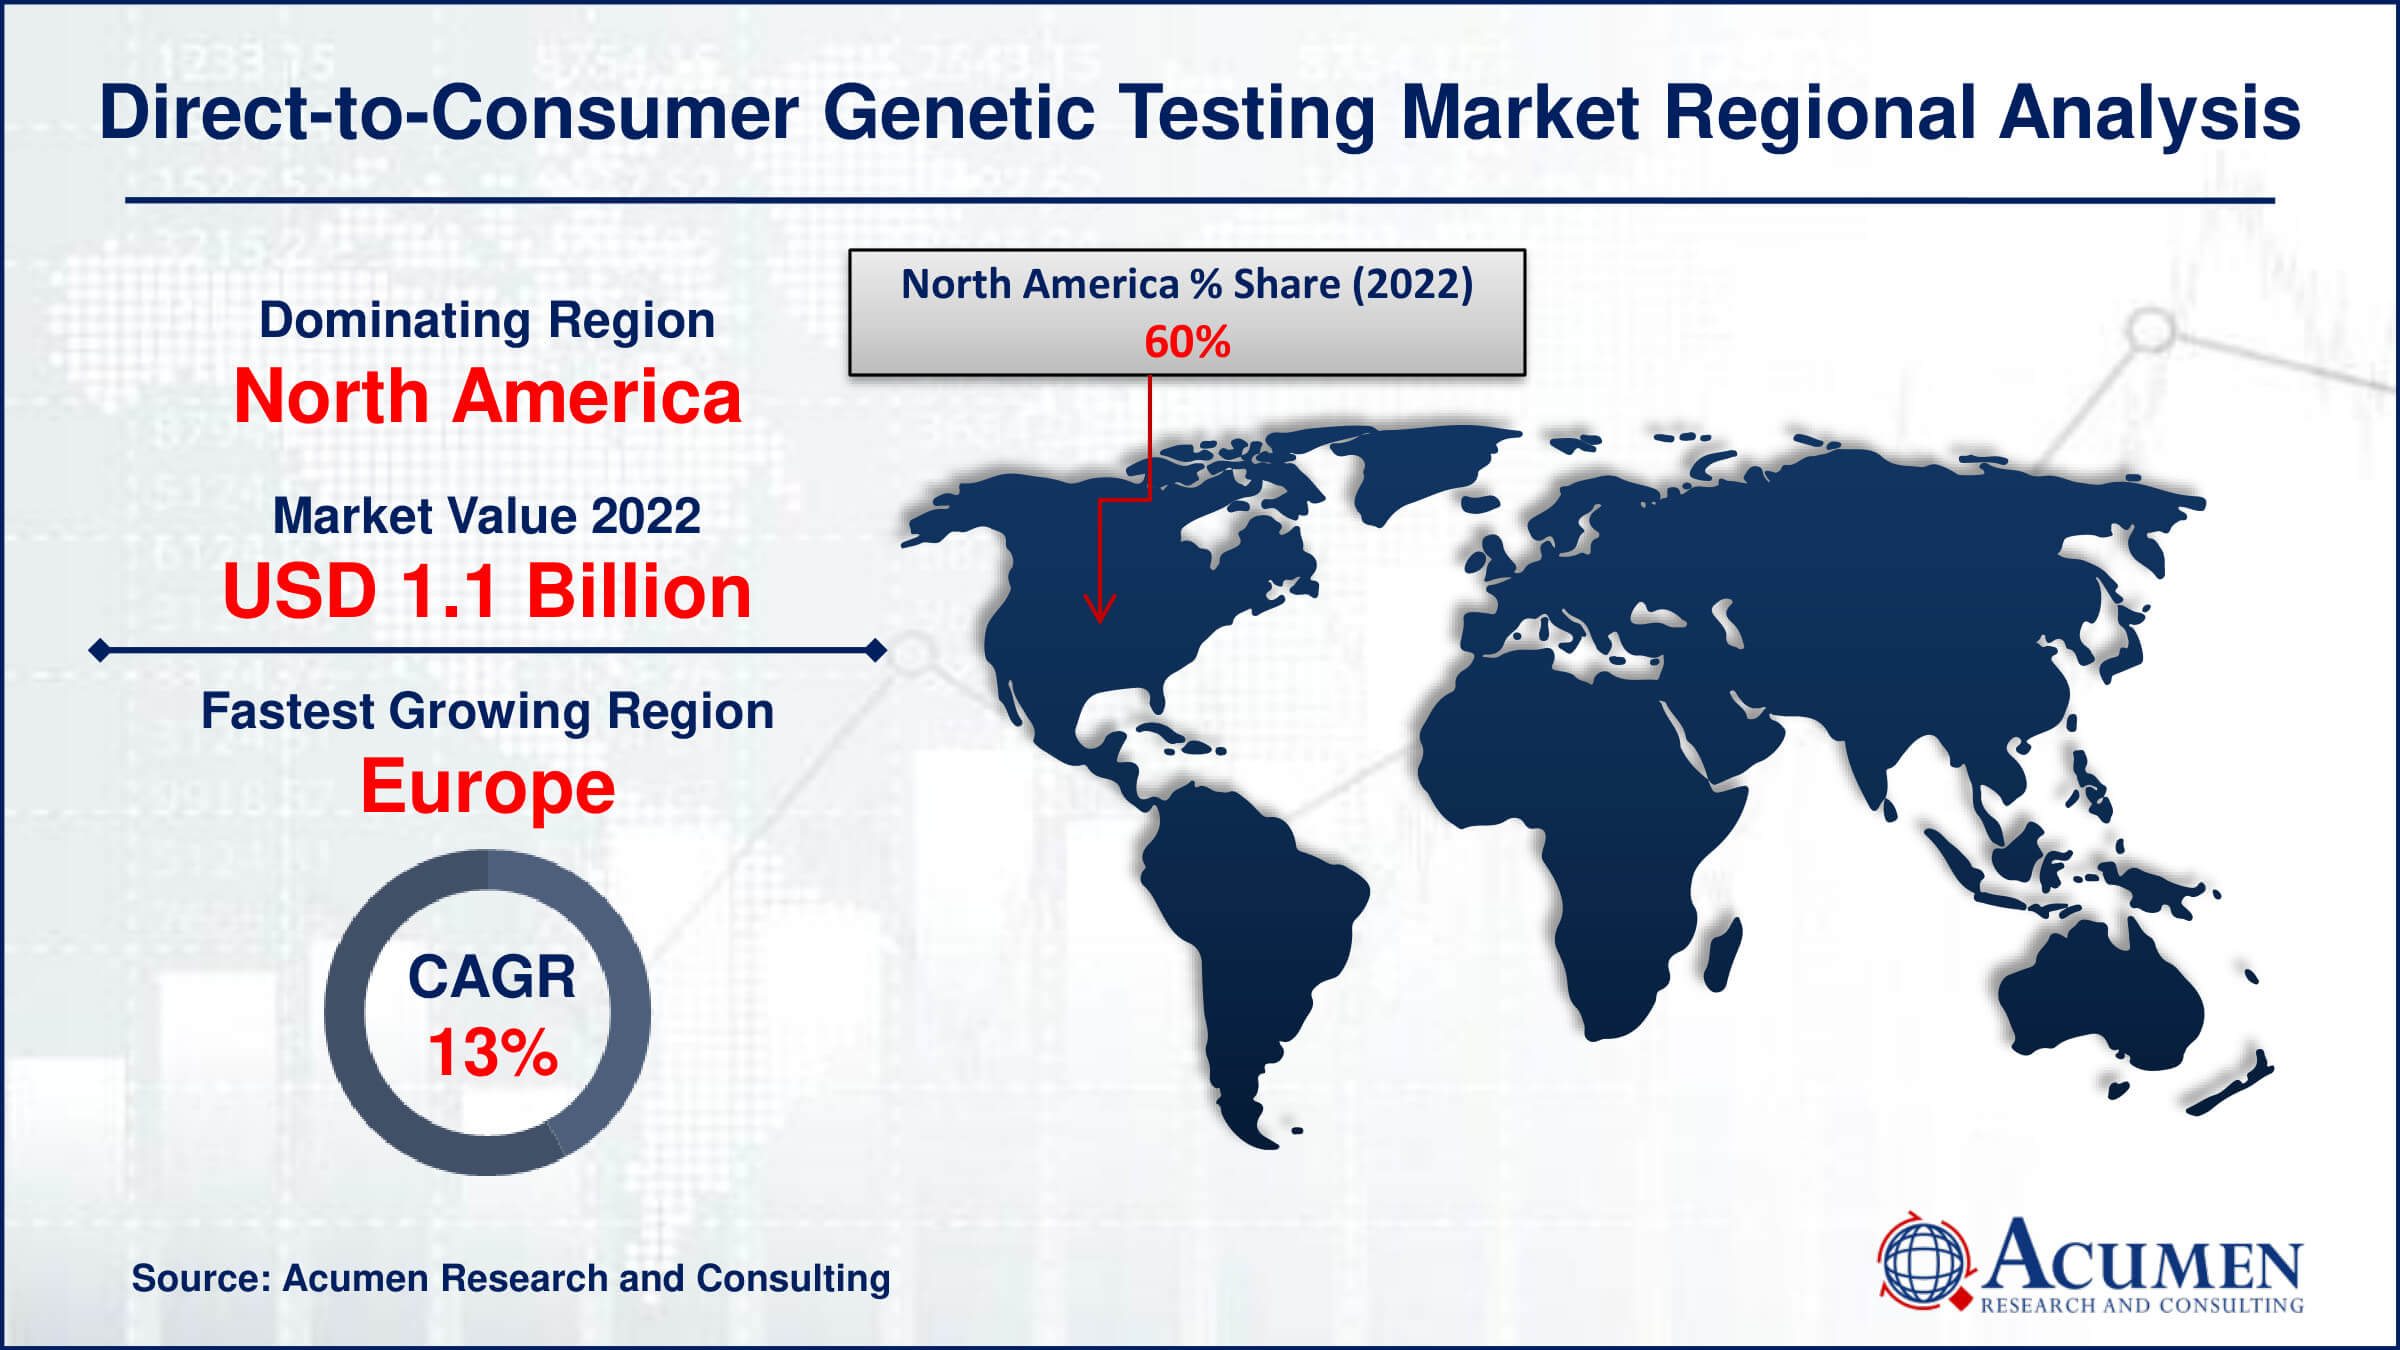 Direct-to-Consumer Genetic Testing Market Drivers